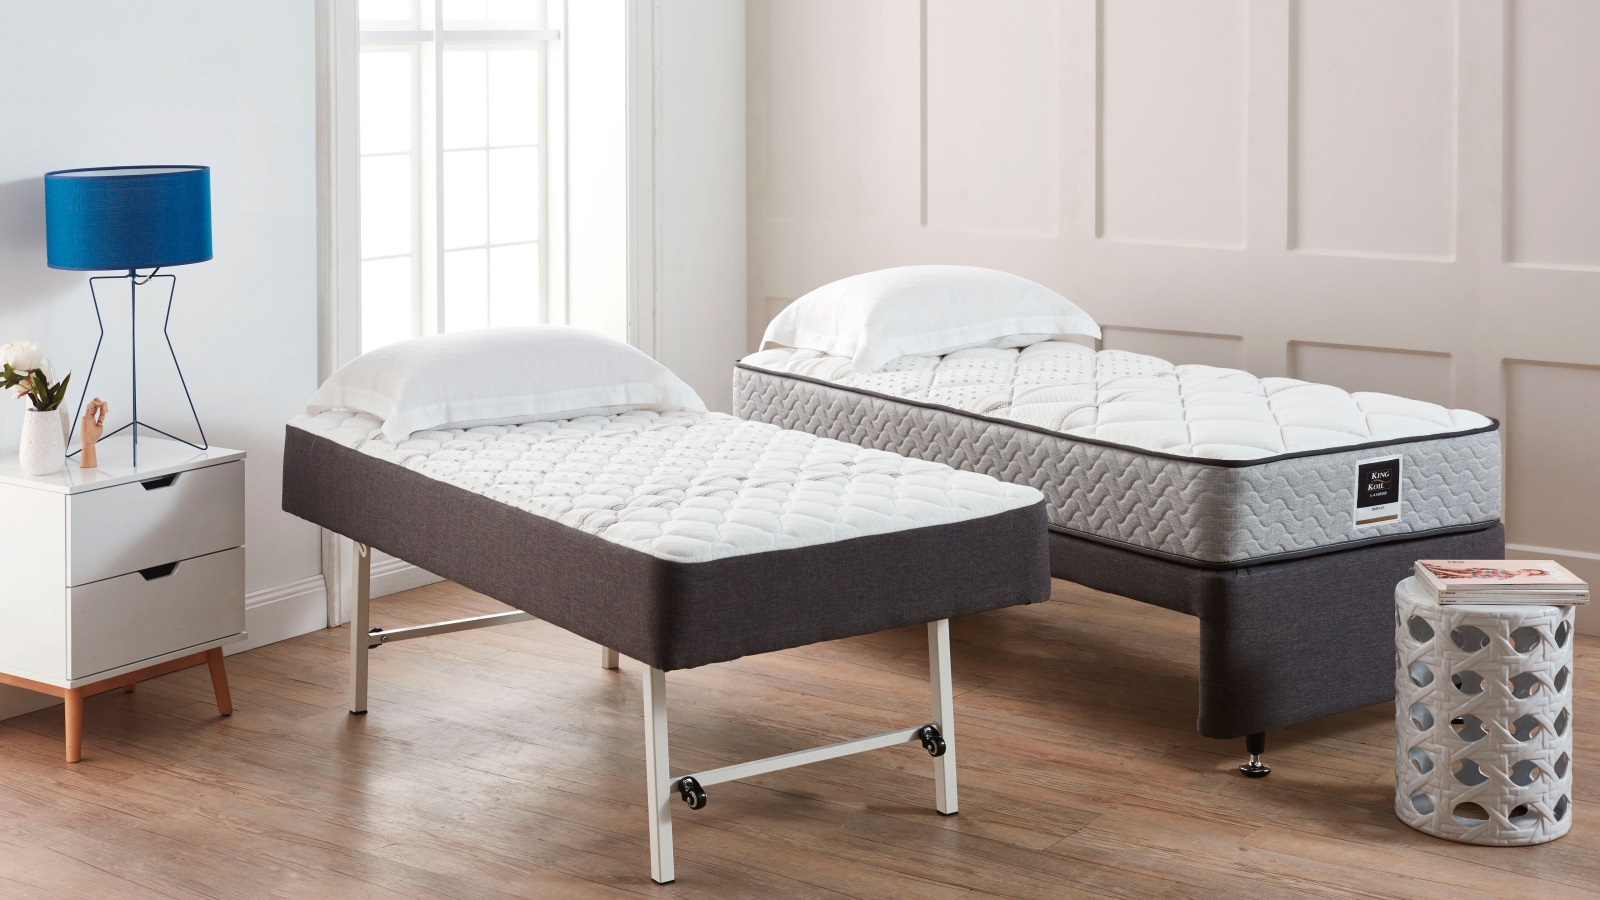 King Koil Rollaway Elevate Base And, King Size Fold Away Beds